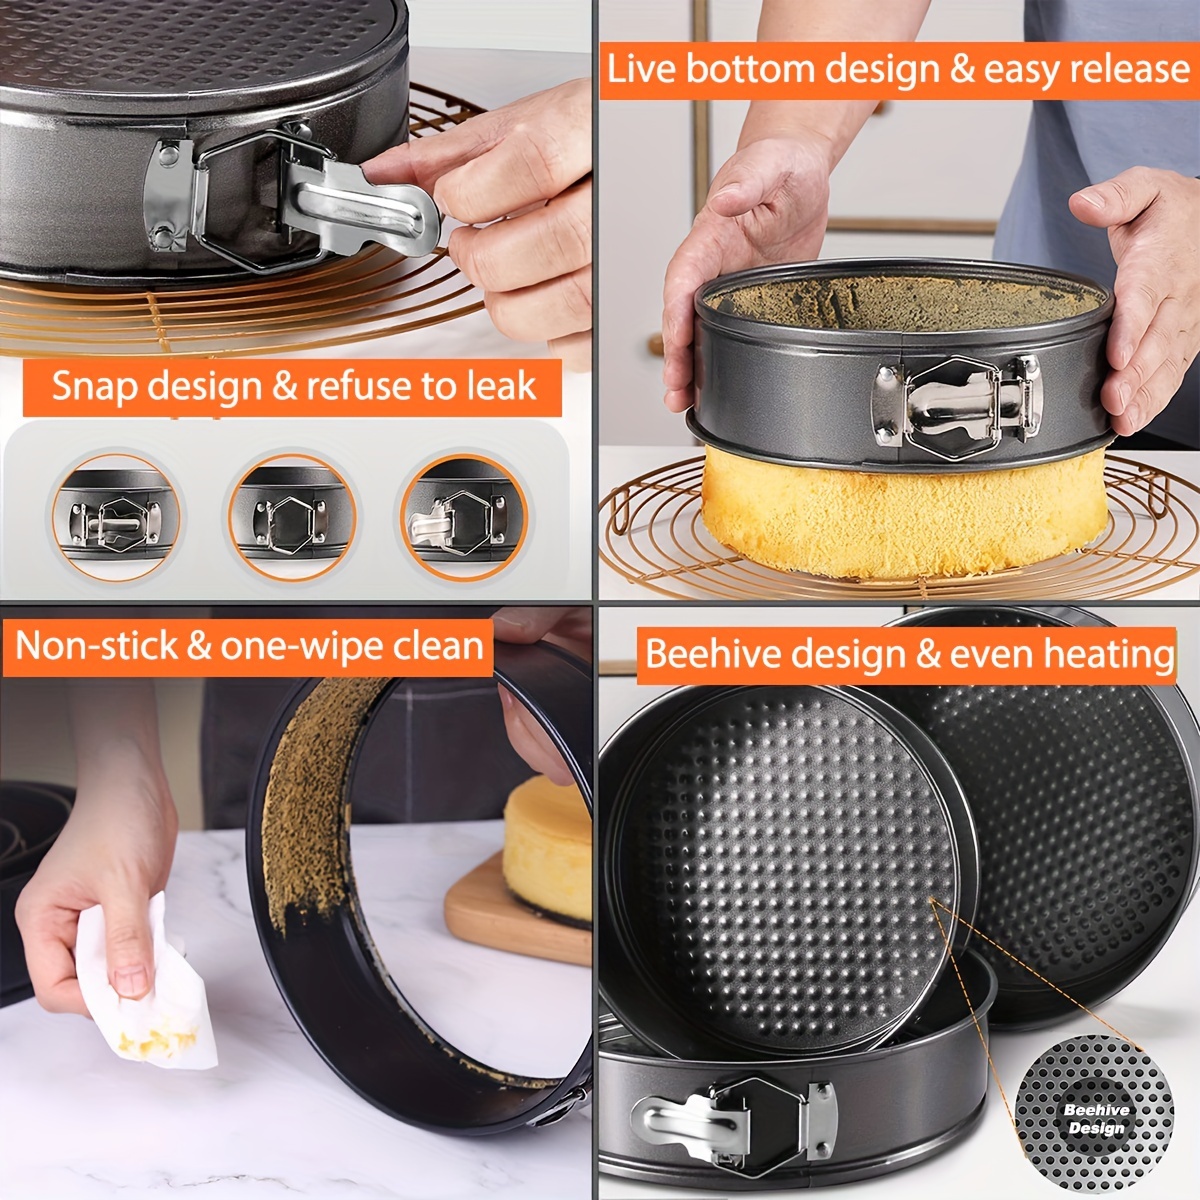 Stainless Steel Springform Cake Pan Set, 7 Nonstick Leakproof Baking Pan  Set, Round Bakeware Cheesecake Pan with Removable Bottoms for Instant Pot